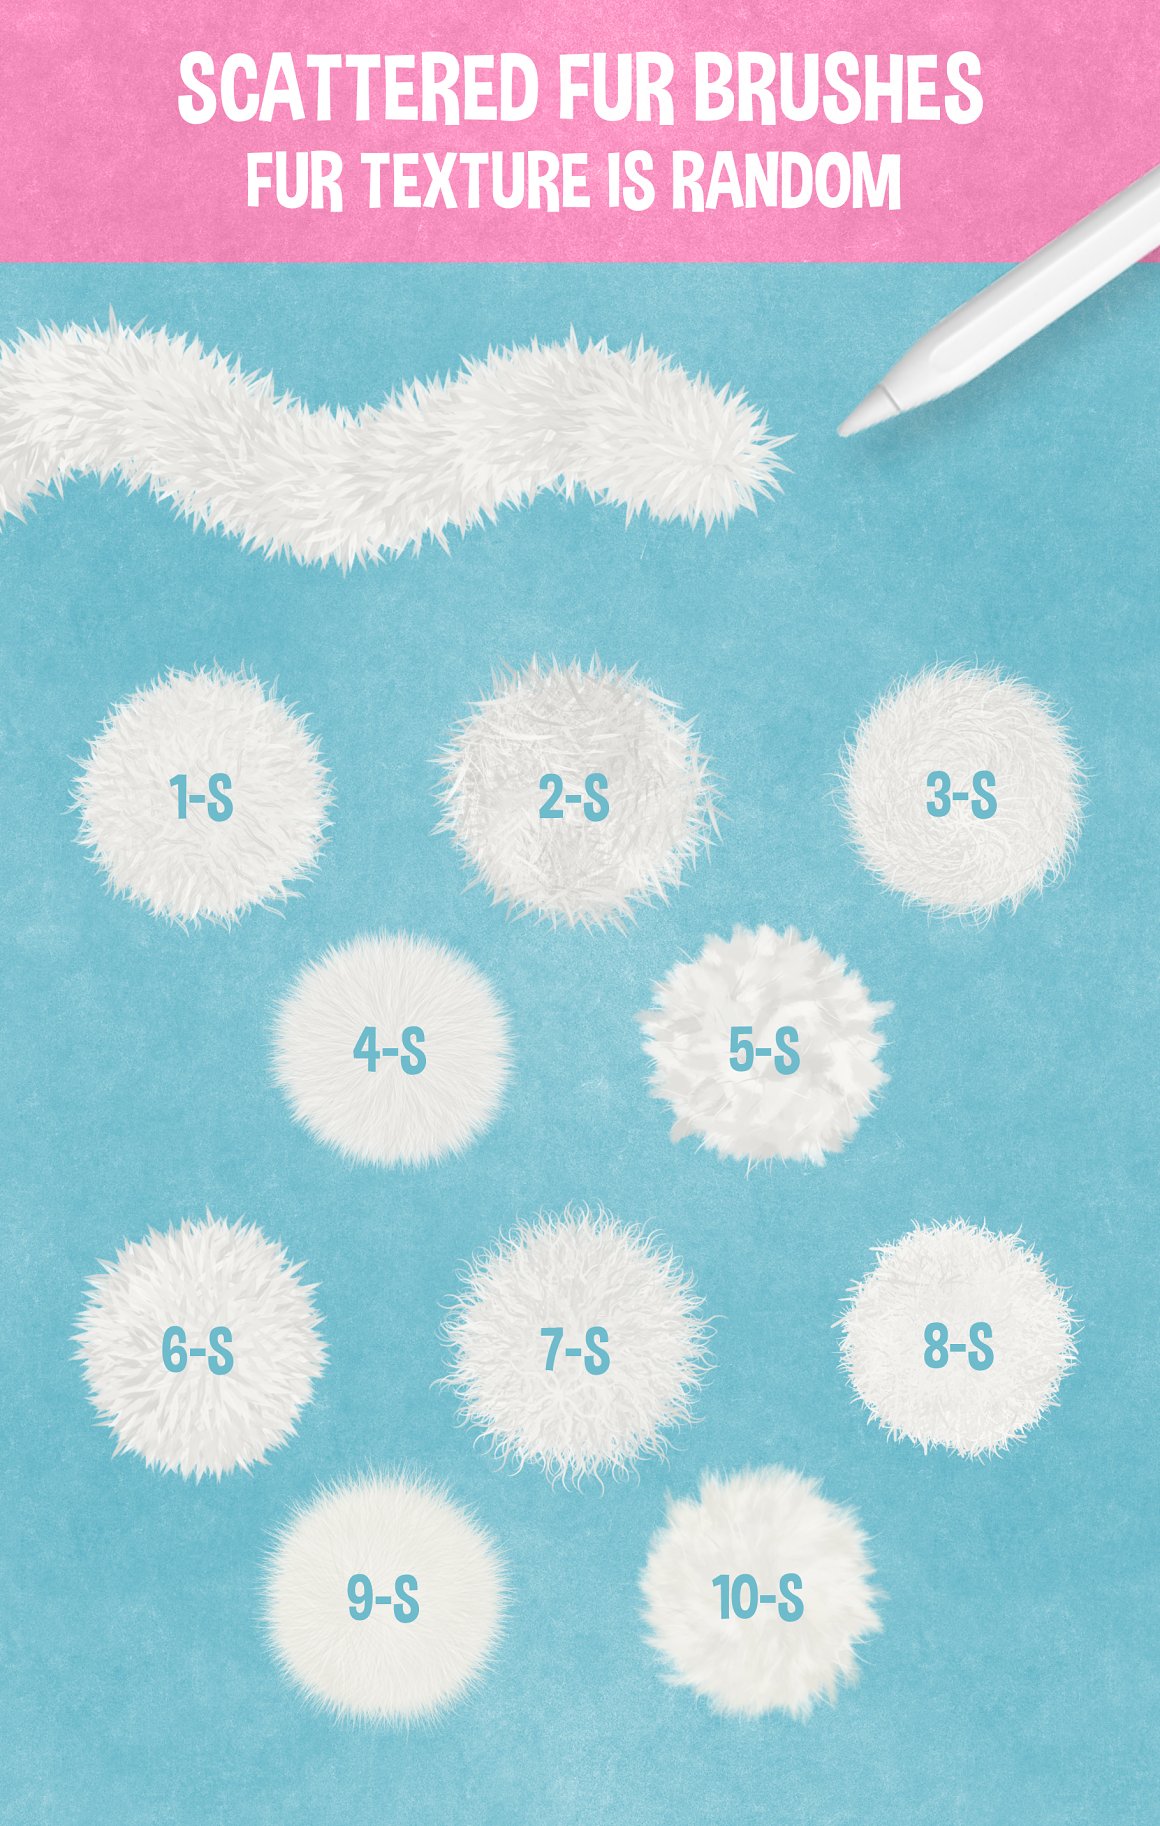 10-S different white fur brushes on a light blue background.